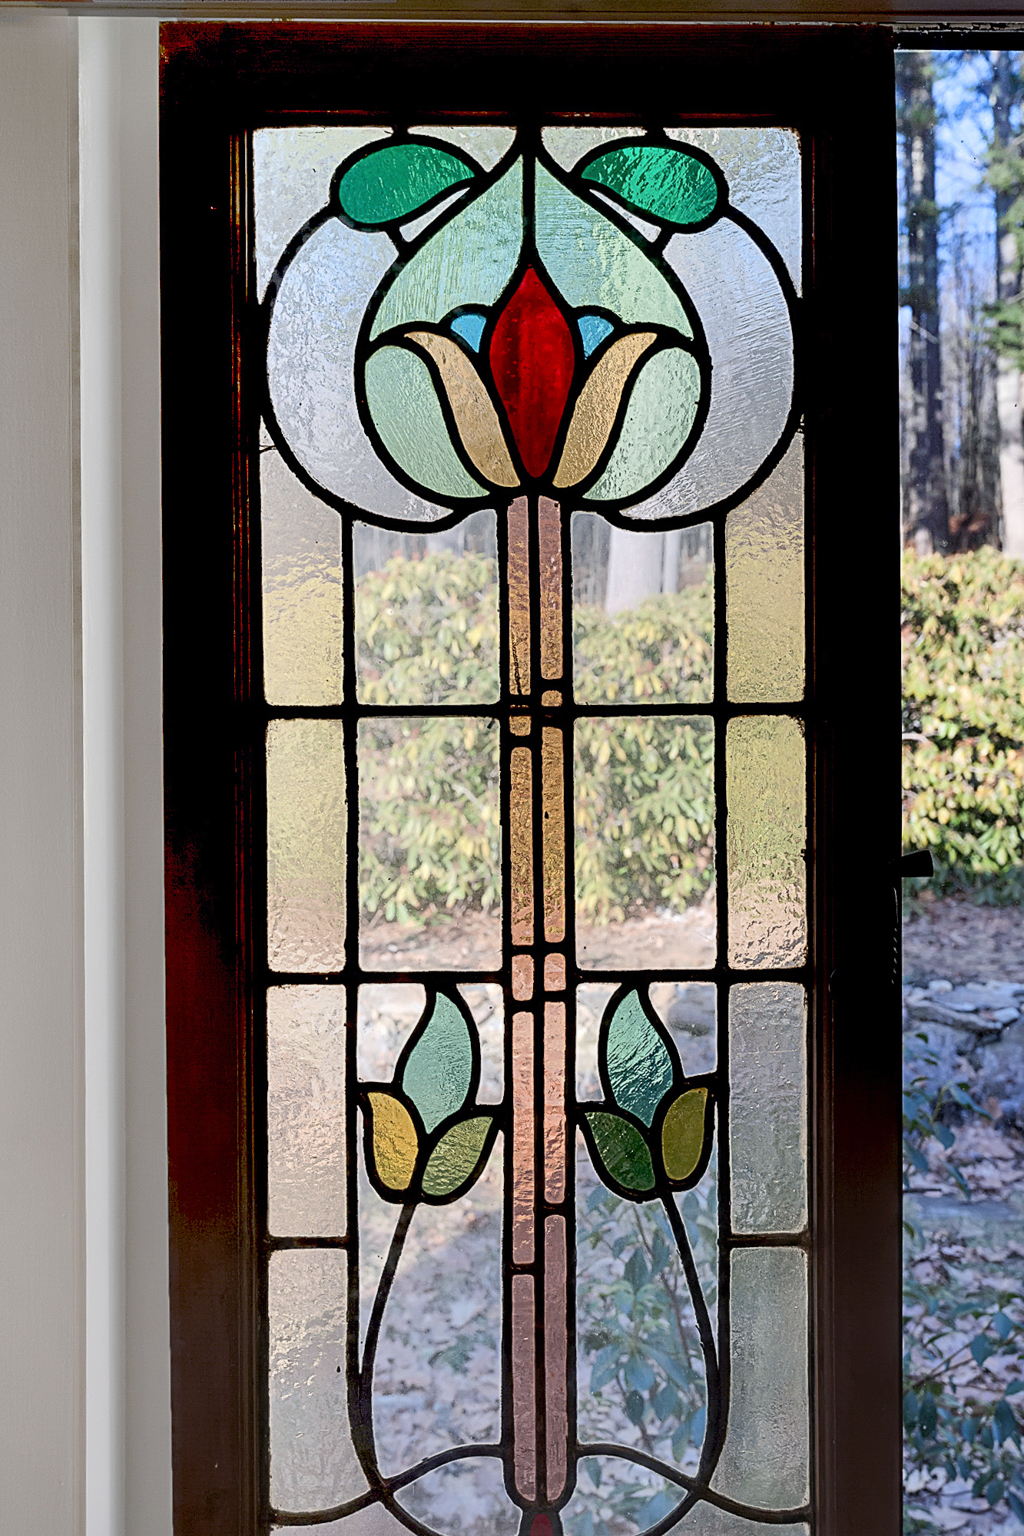 Stained Glass detail